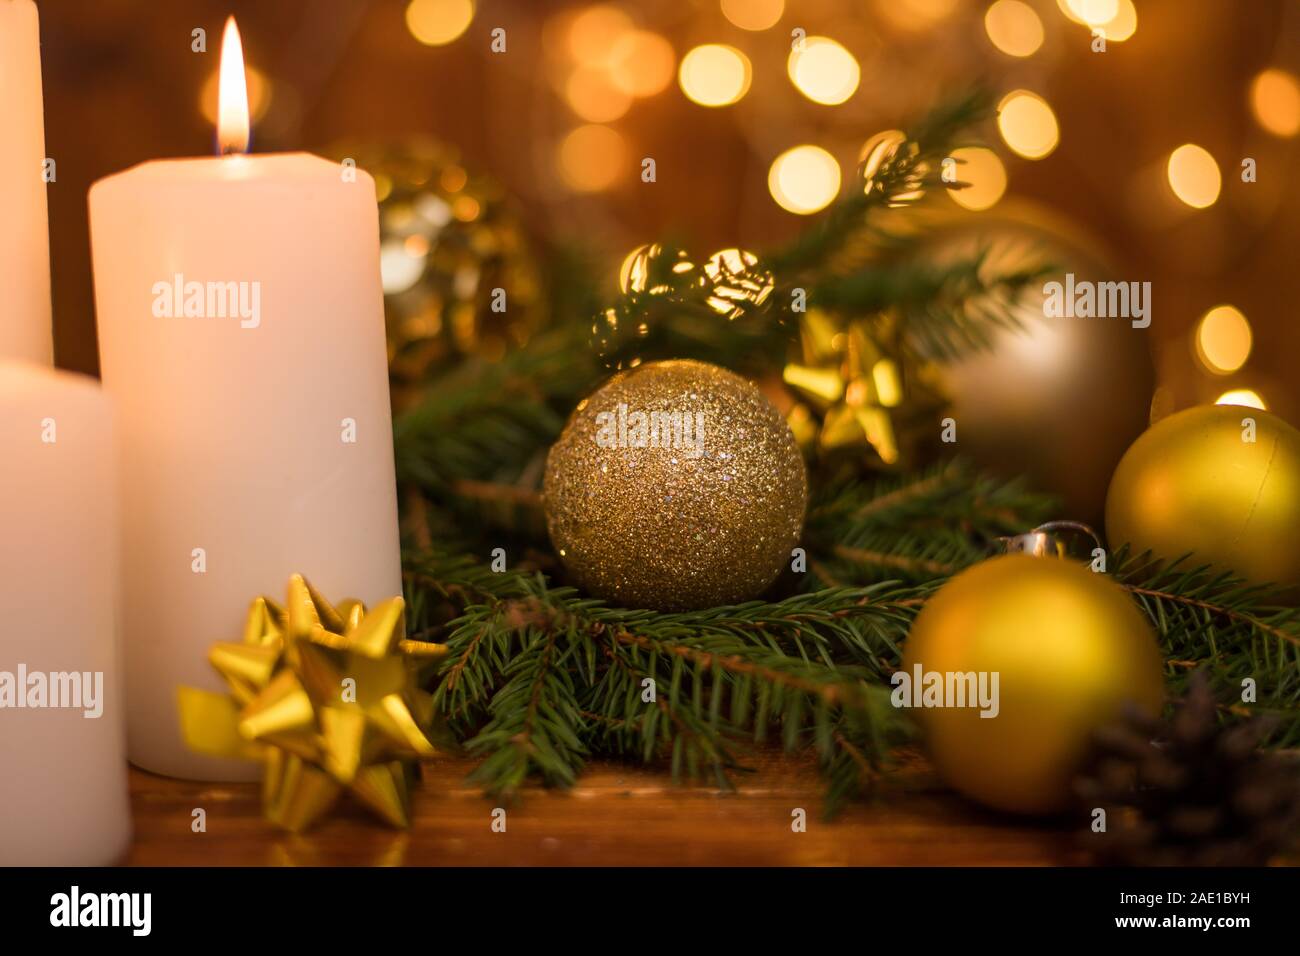 Golden Christmas ball on a tree branch, white candle flame, bokeh lights on a background Stock Photo